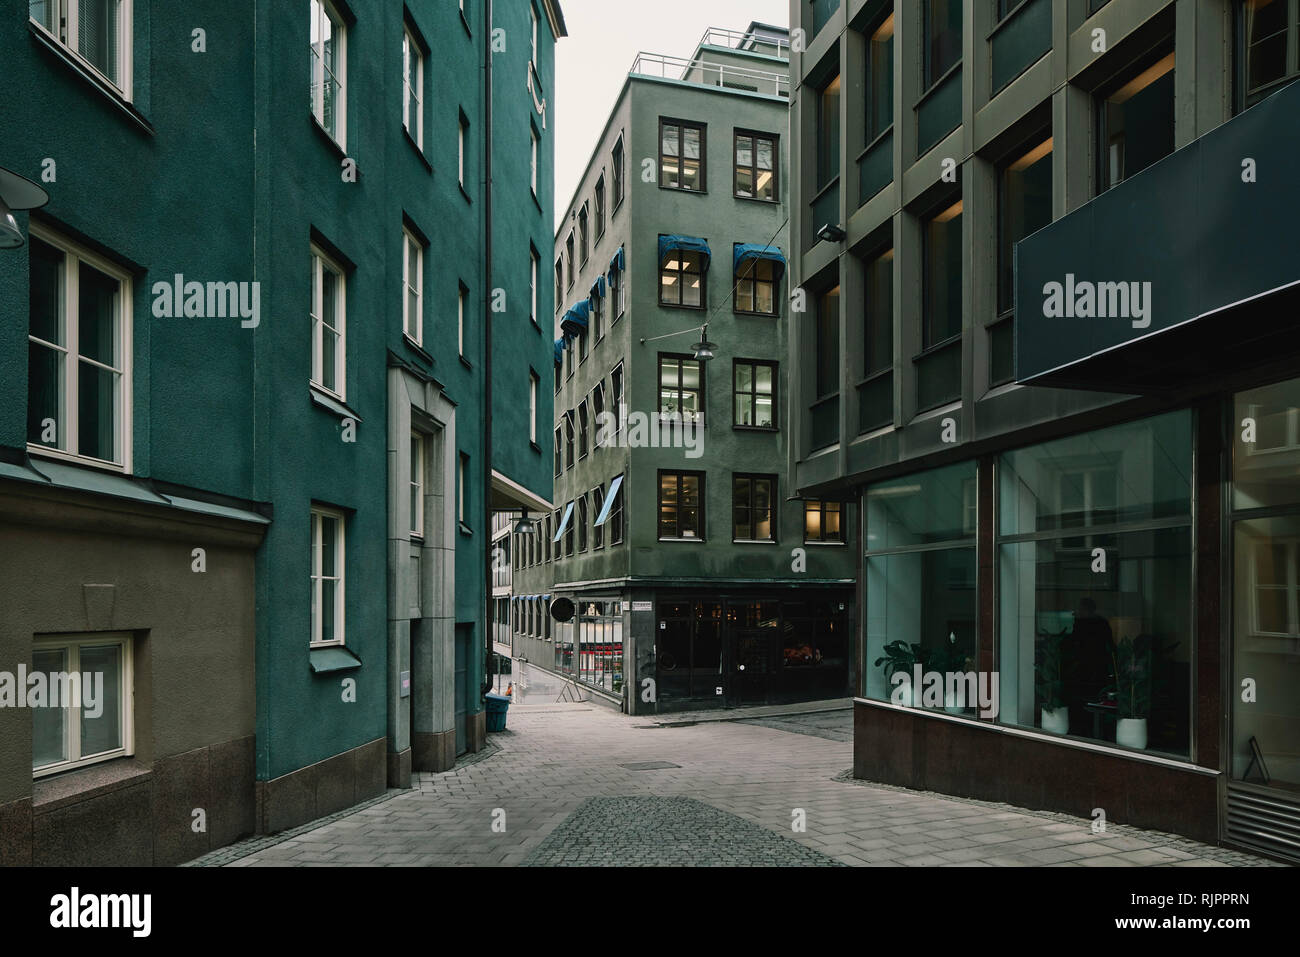 Green apartment buildings and hotel, Stockholm, Sweden Stock Photo